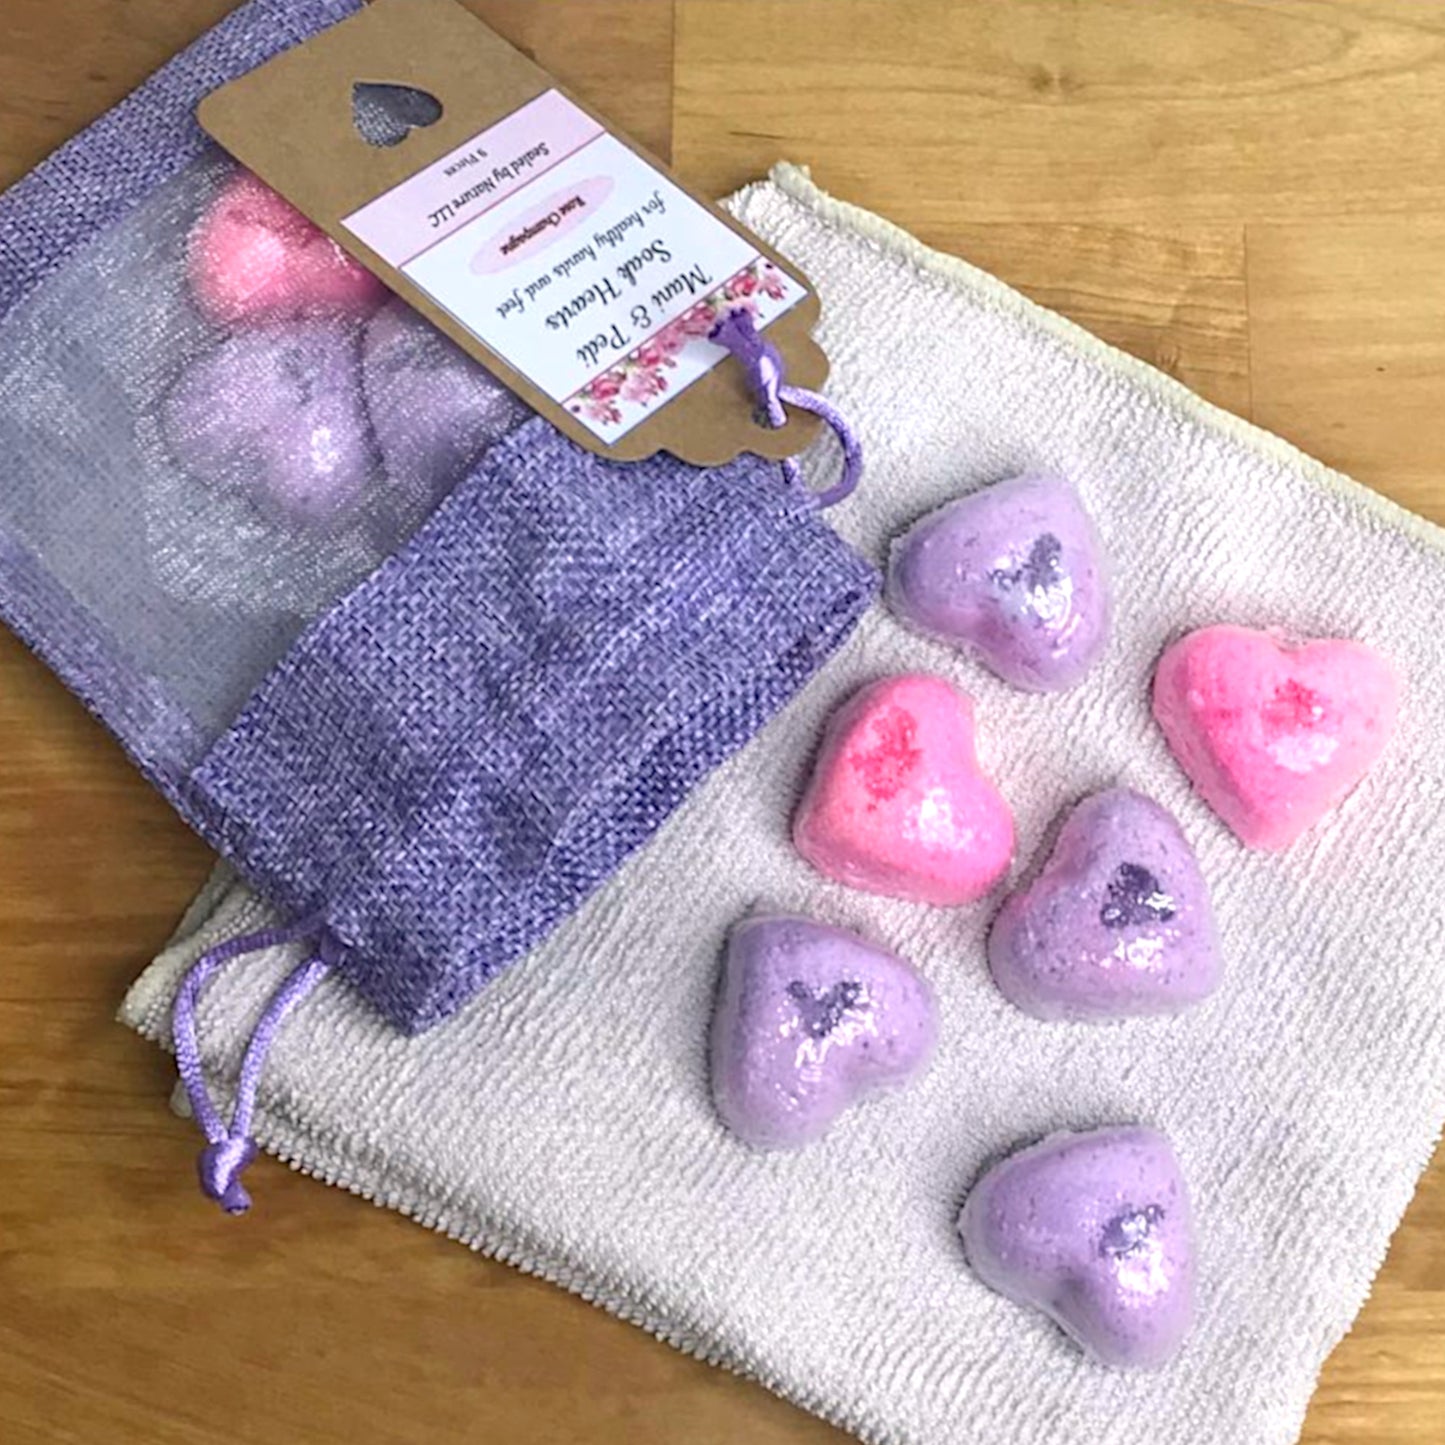 Mani and Pedi Soak Hearts for Healthy Hands and Feet